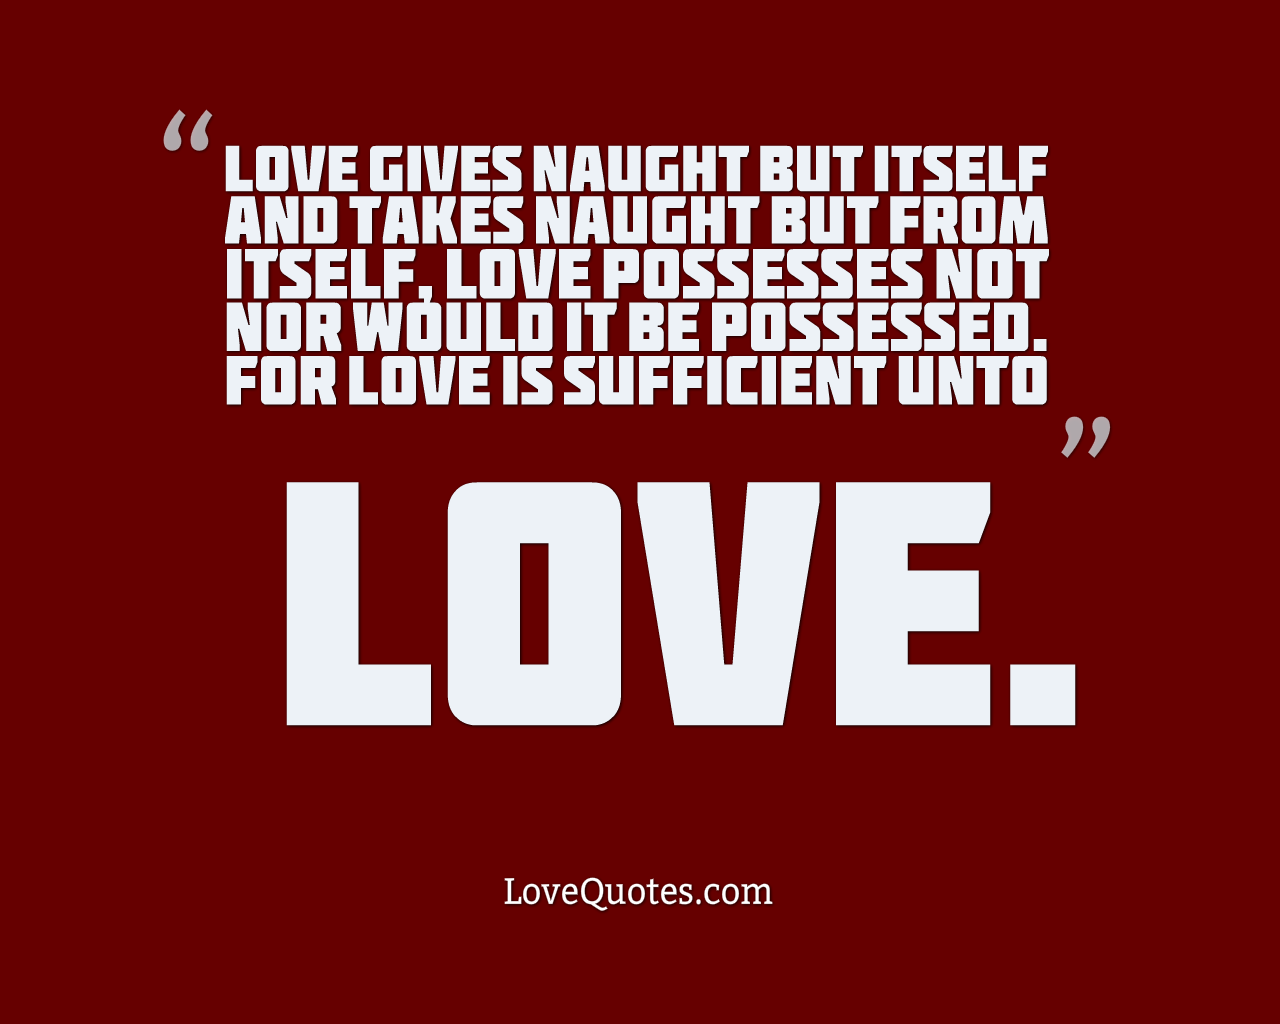 Love Is Sufficient